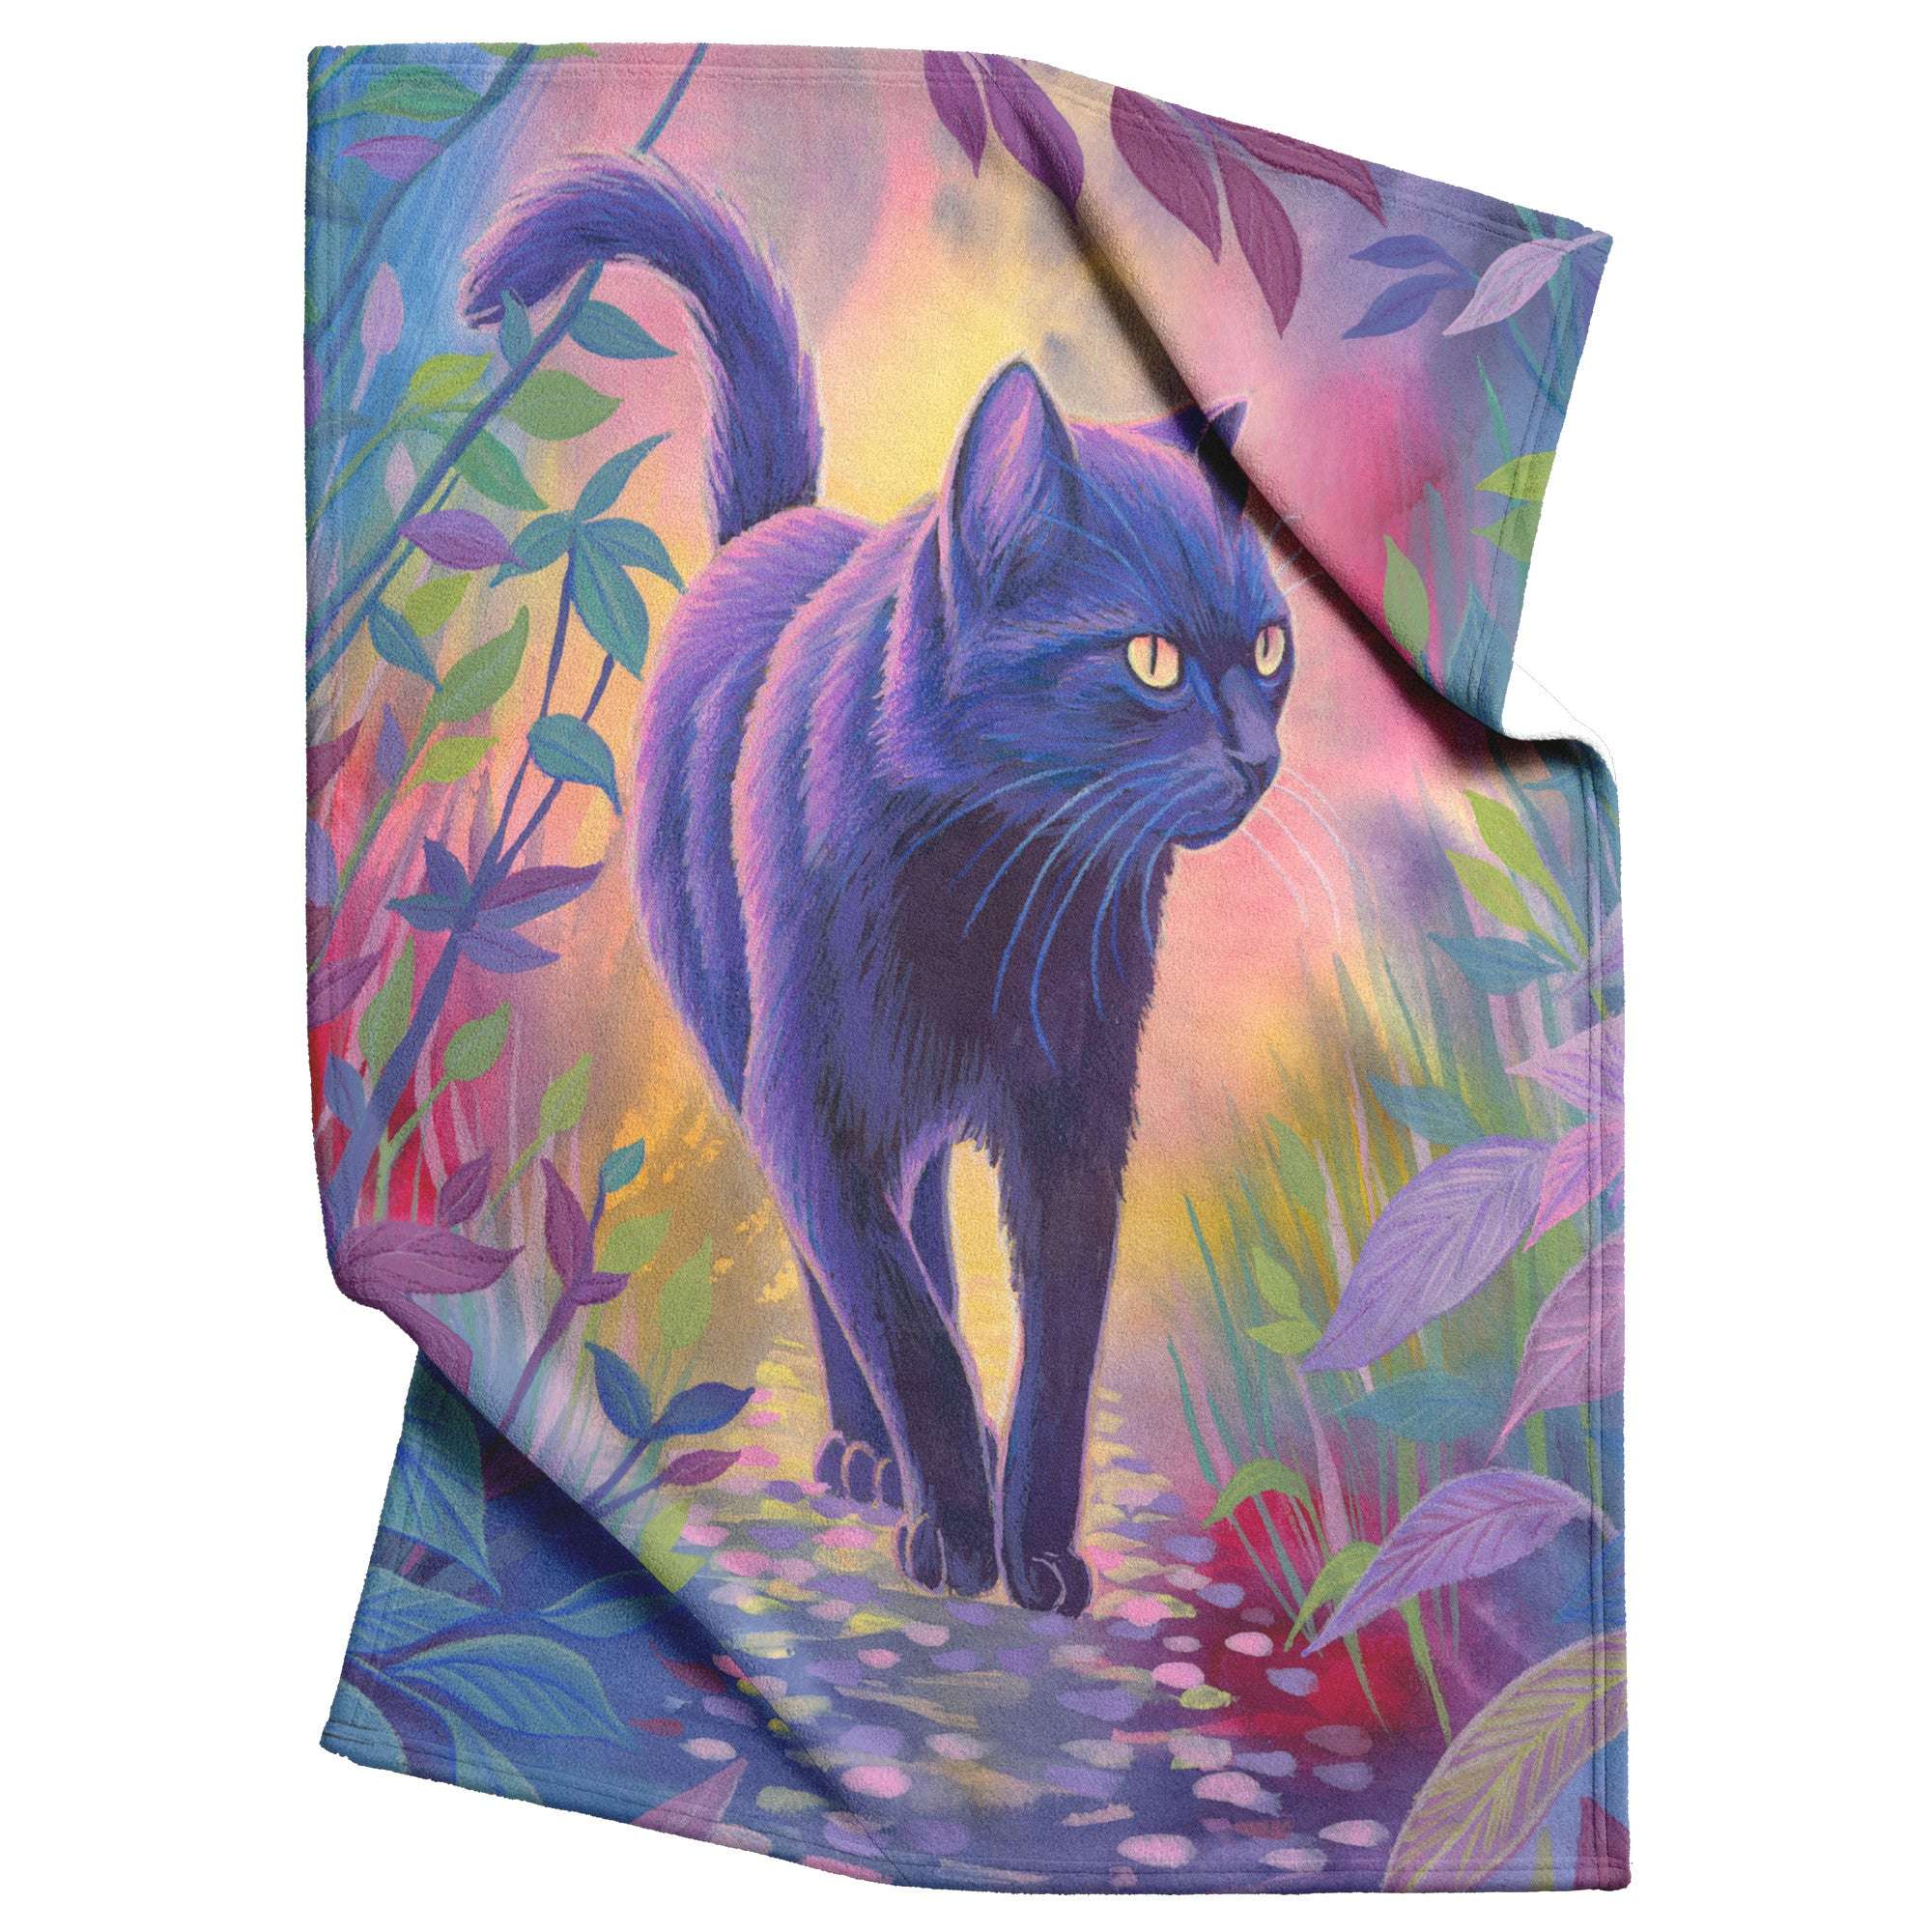 Blanket with a Black Cat walking through a colorful, mystical forest with sunlight filtering through leaves.